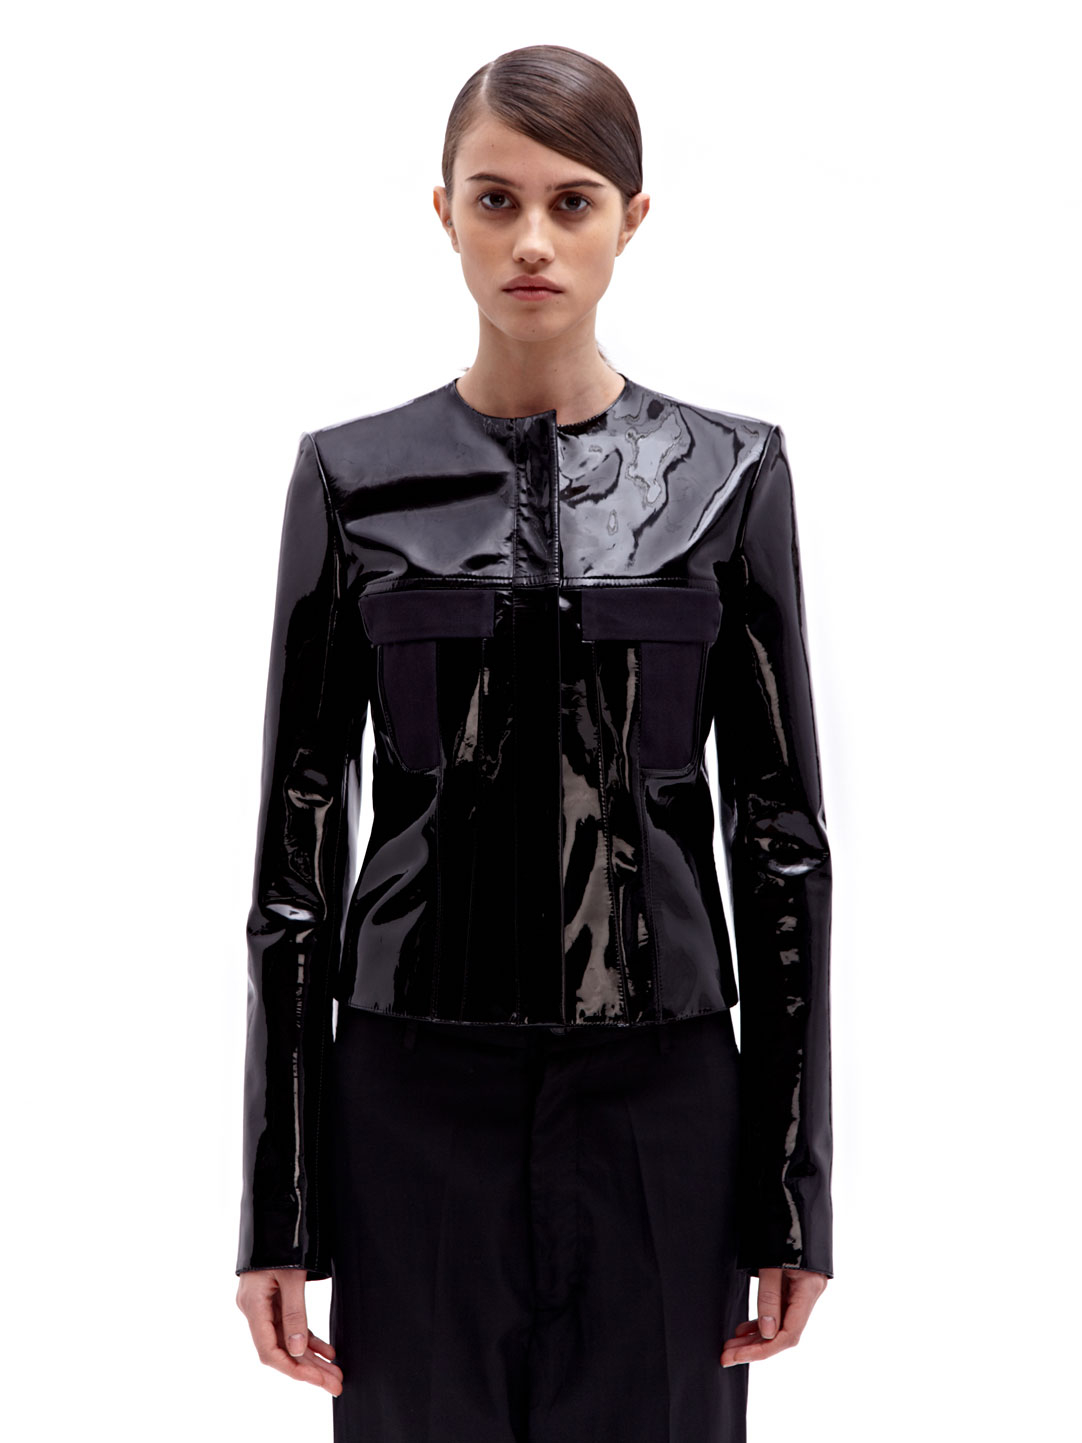 Paco rabanne Womens Patent Leather Jacket in Black | Lyst